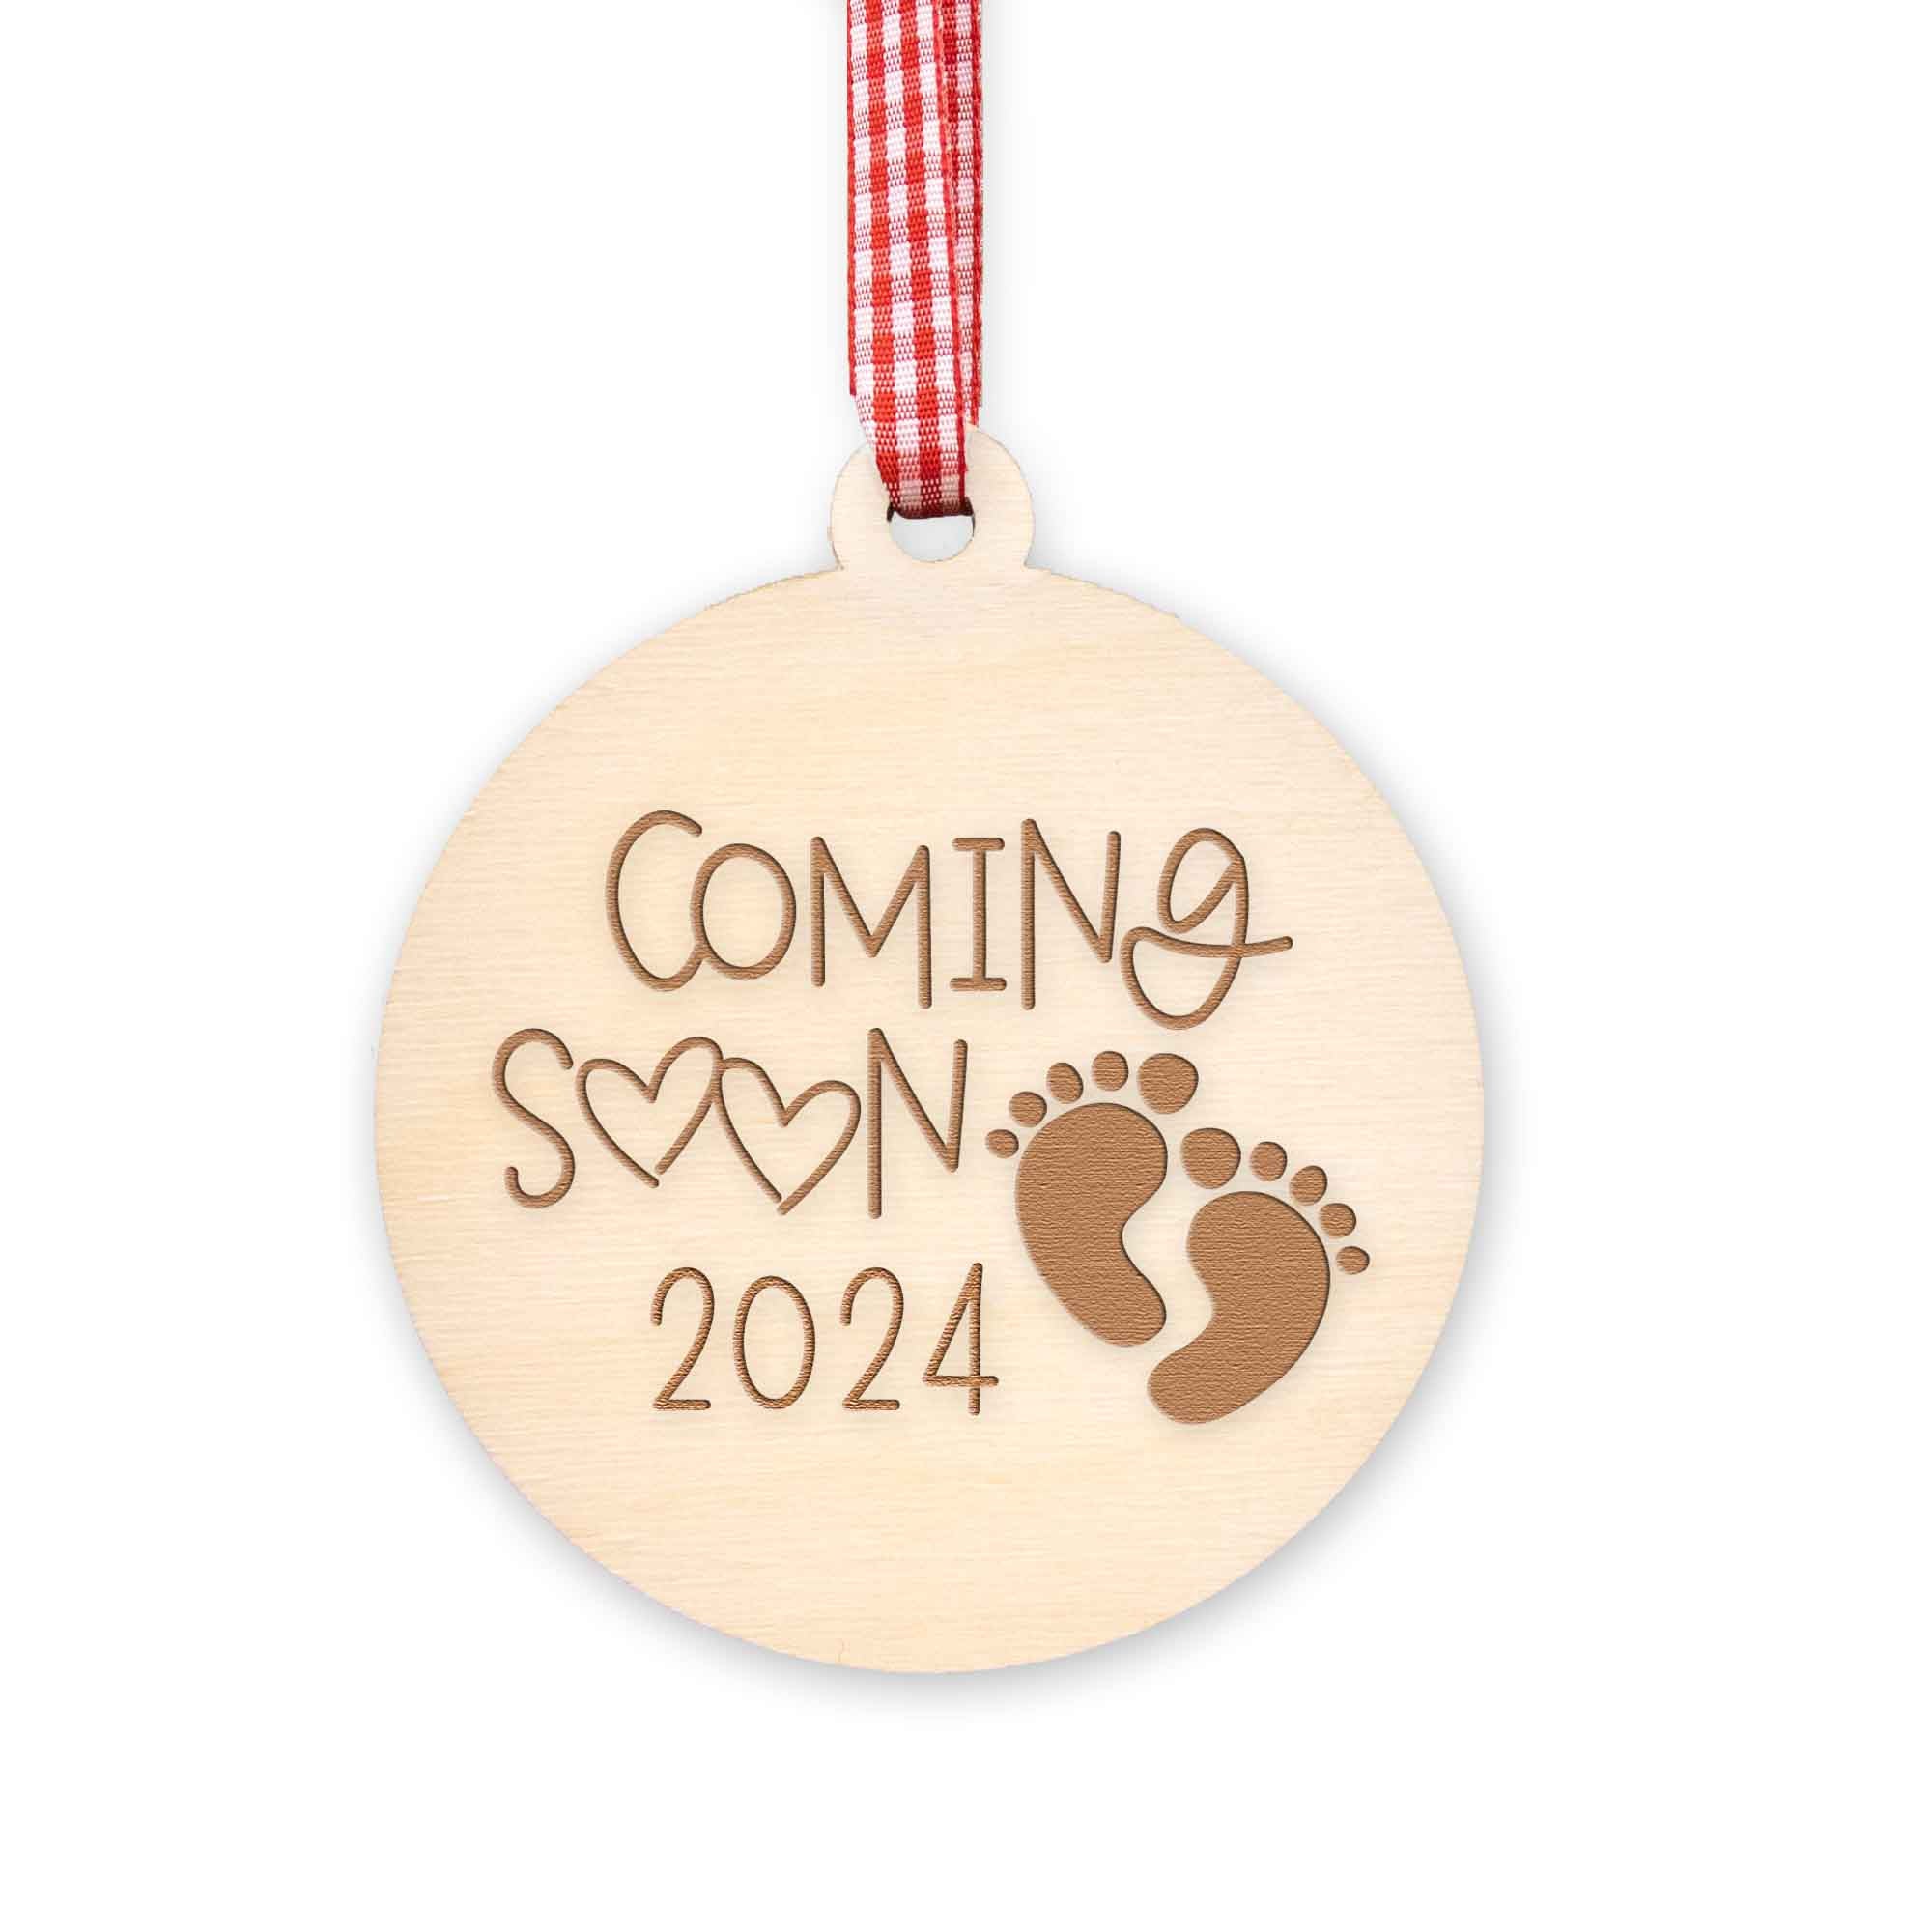 Pregnancy Announcement Wood Christmas Ornament - Coming Soon 2023